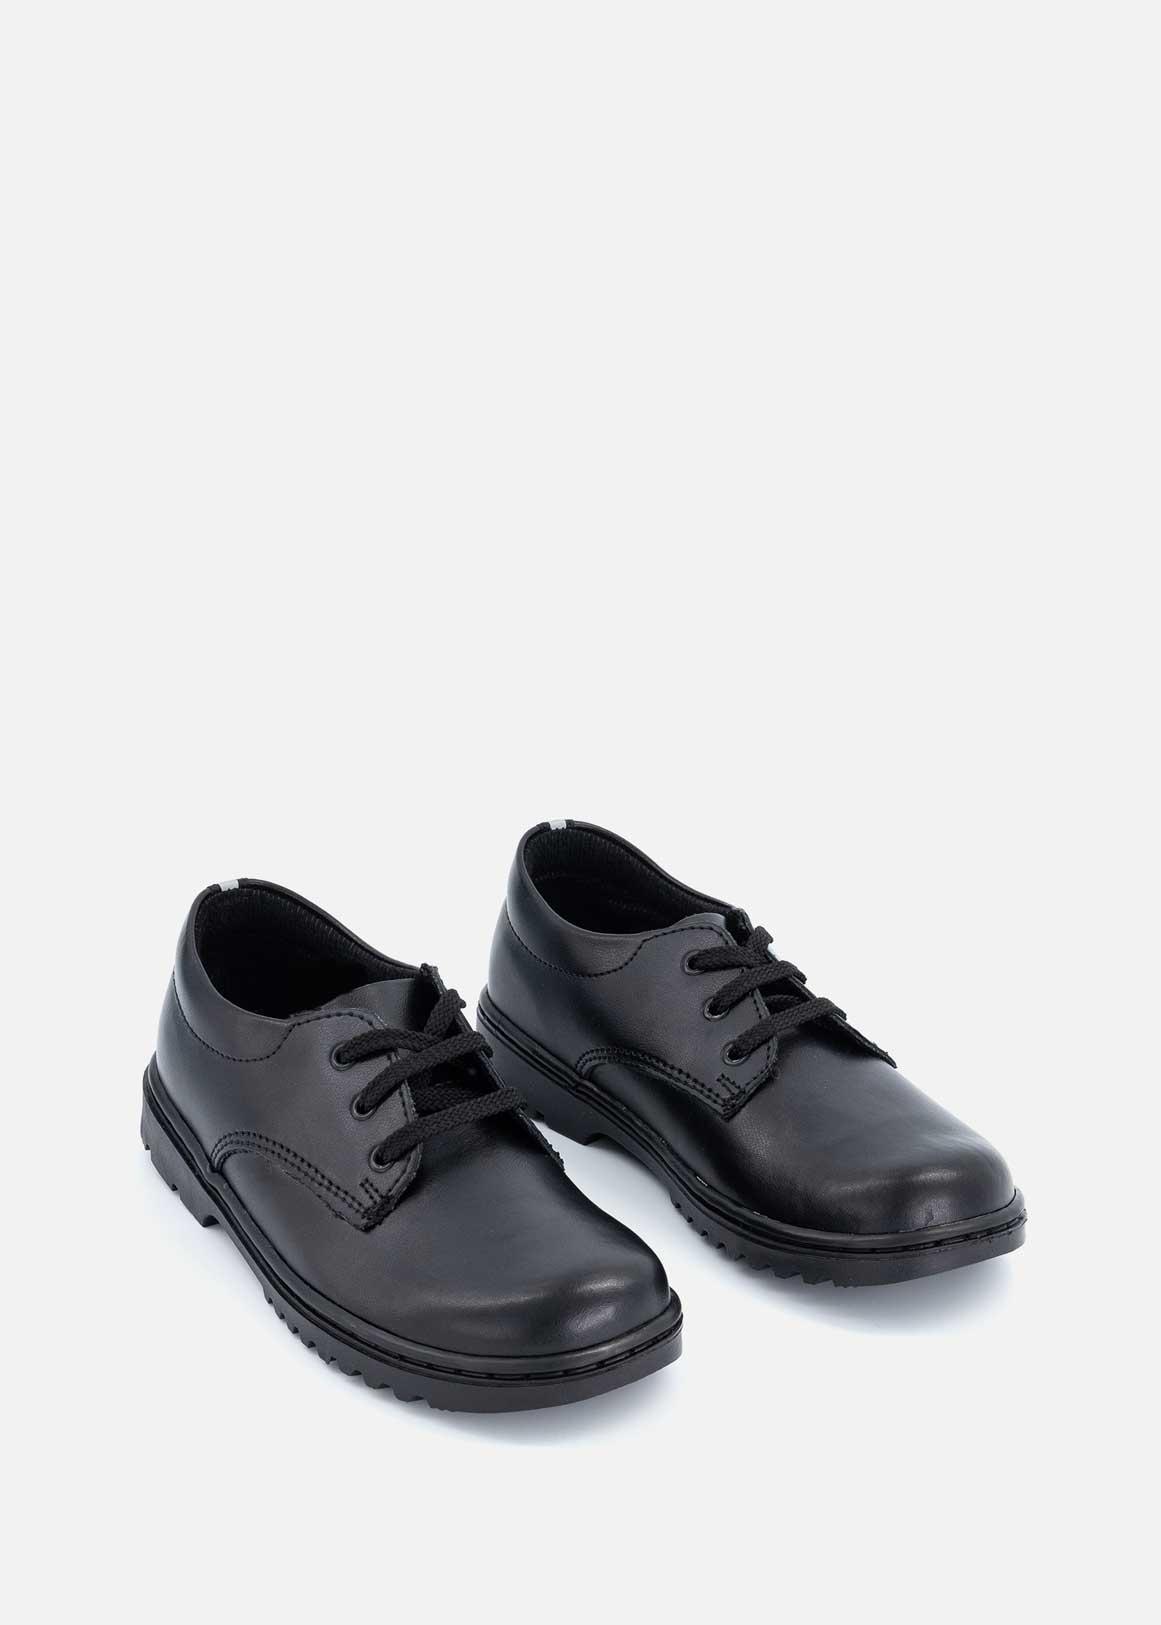 Lace Up Leather School Shoes (Size 8 - 1) Younger Boy